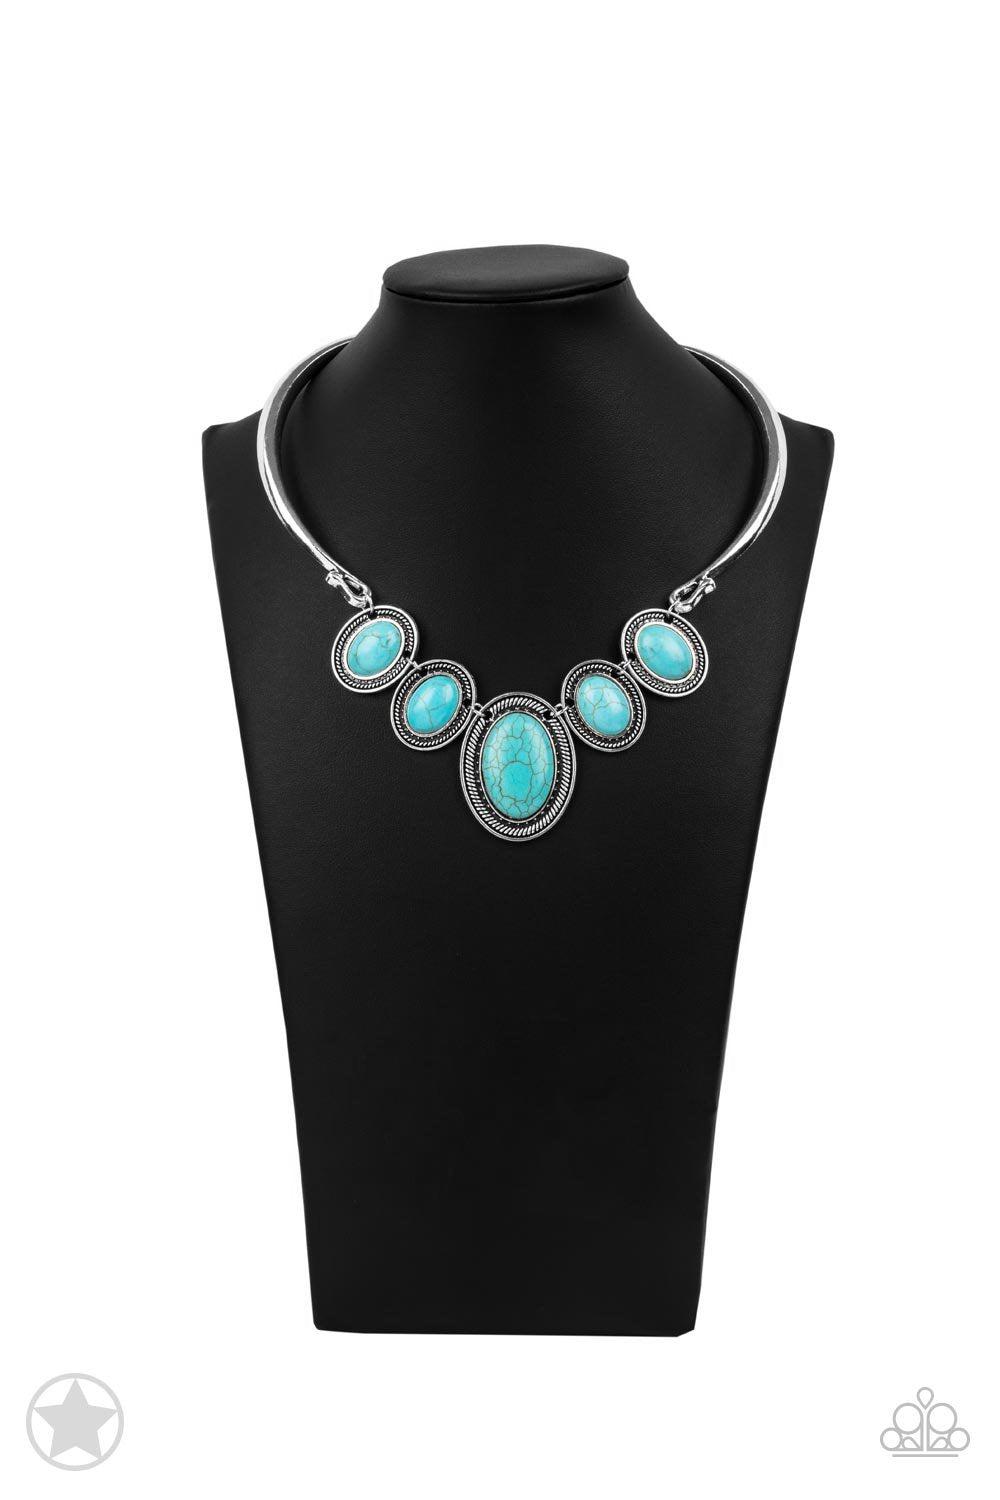 River Ride Blue Turquoise Stone Necklace and matching Earrings - Paparazzi Accessories- on bust -CarasShop.com - $5 Jewelry by Cara Jewels